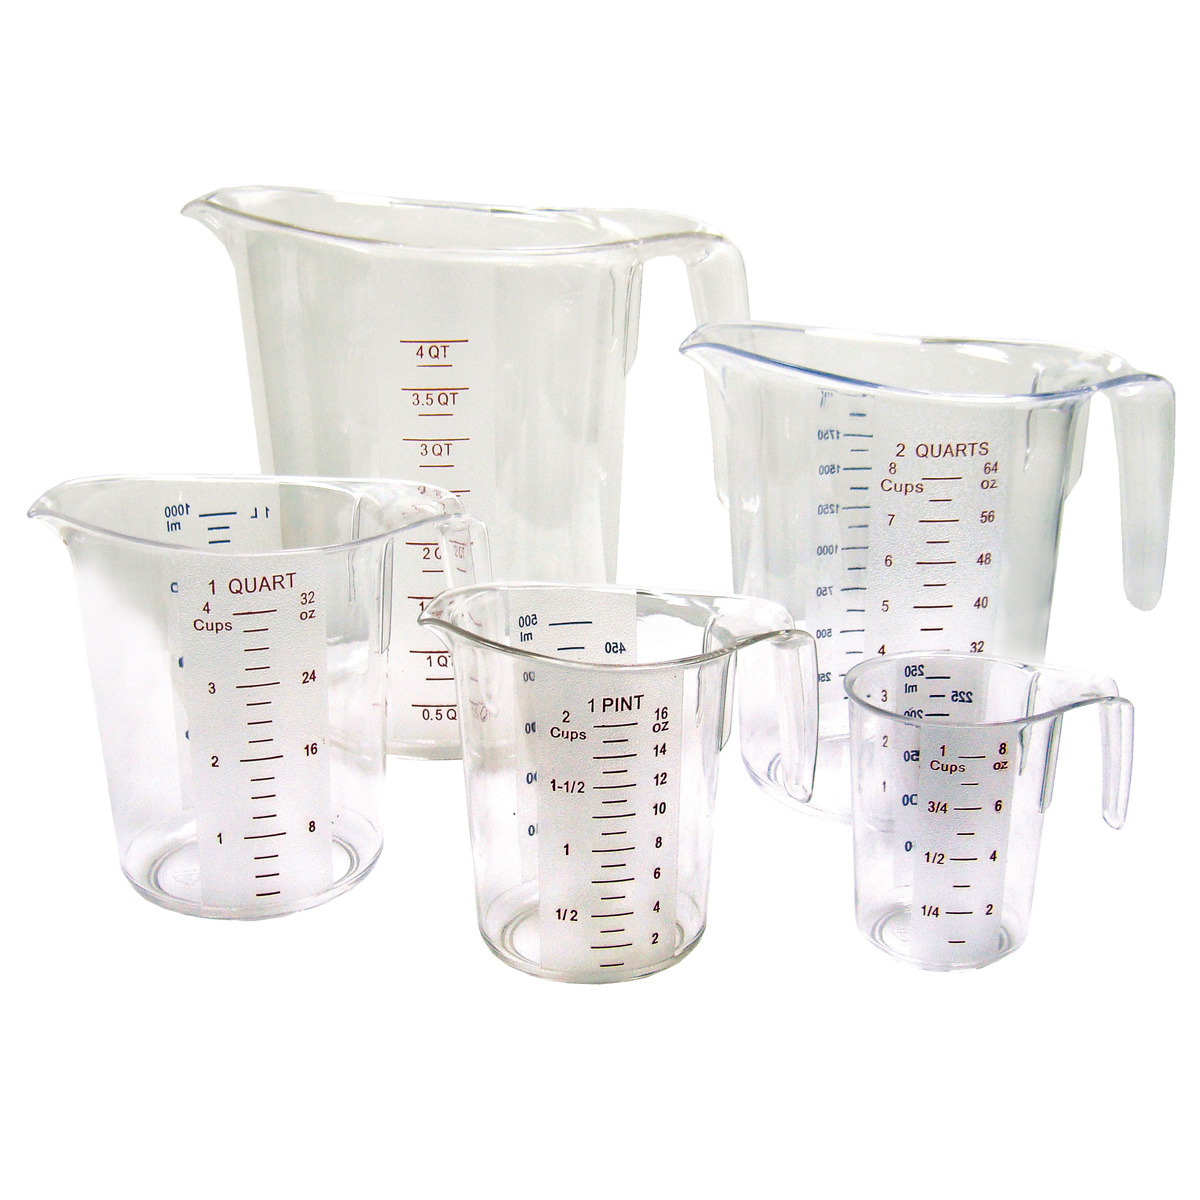 Winware by Winco PMCP-50 Polycarbonate Measuring Cup - 1 Pint image 1